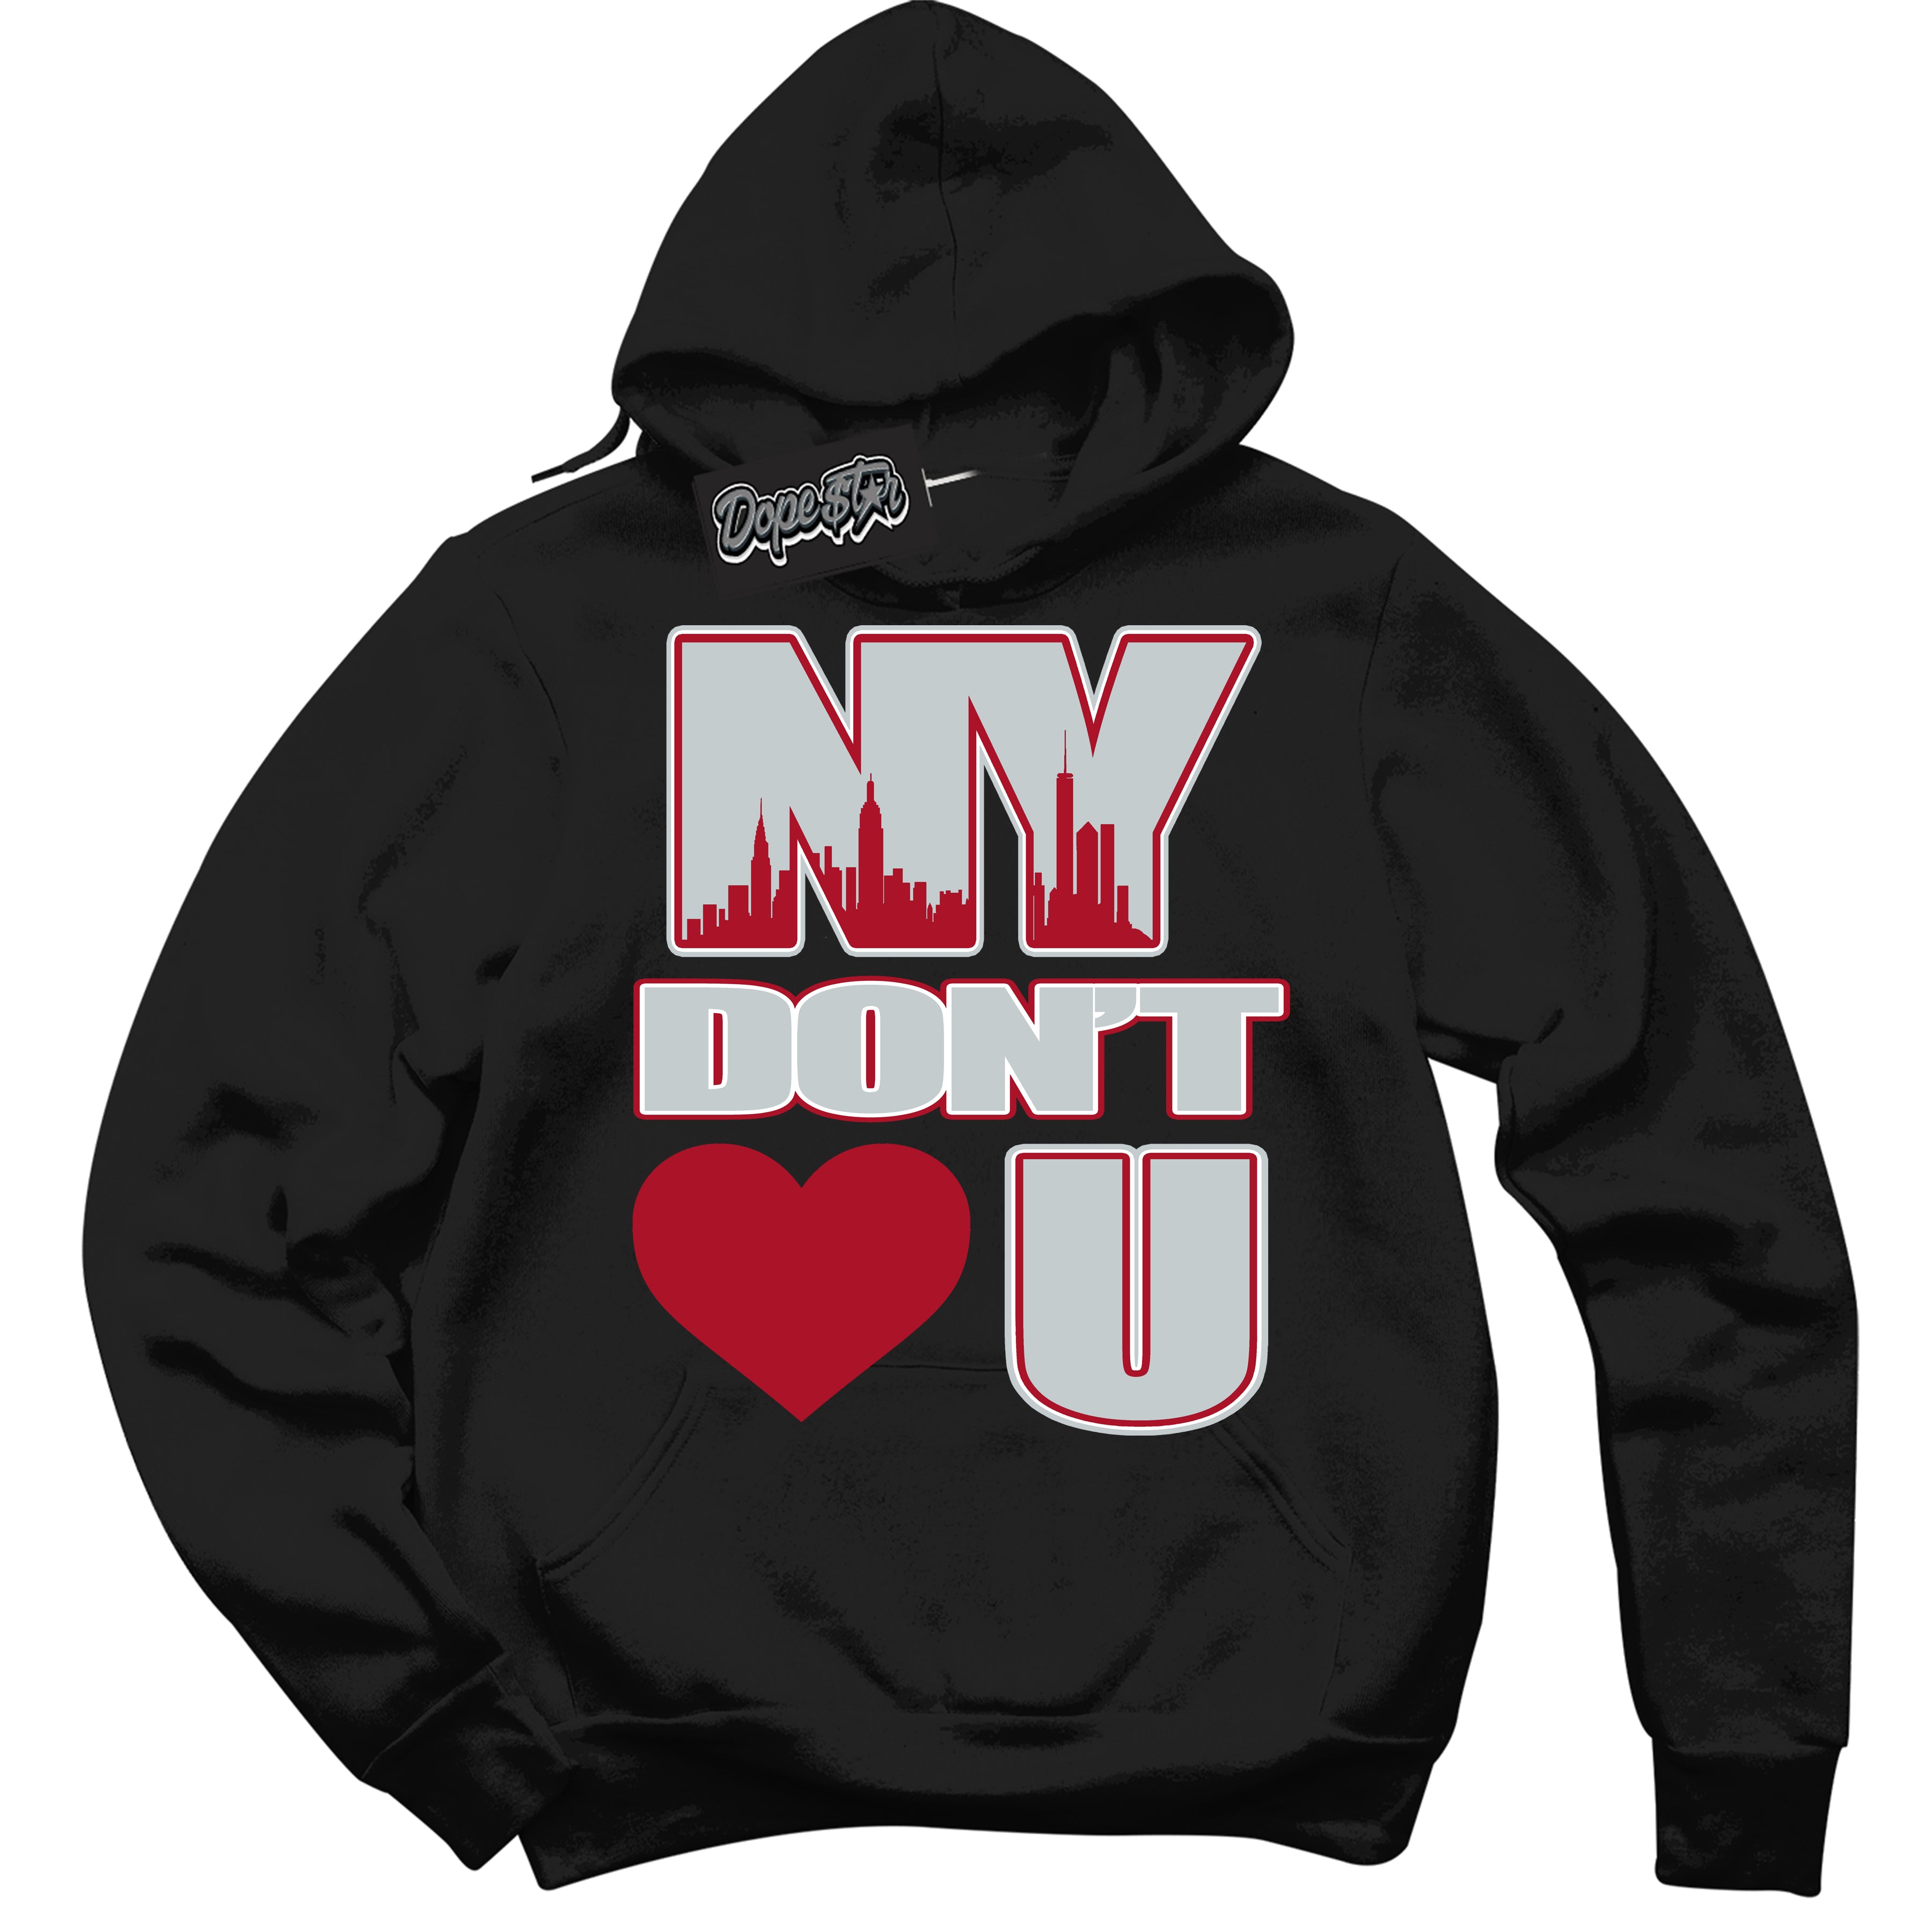 Cool Black Hoodie with “ NY Don't Love You ”  design that Perfectly Matches  Reverse Ultraman Sneakers.